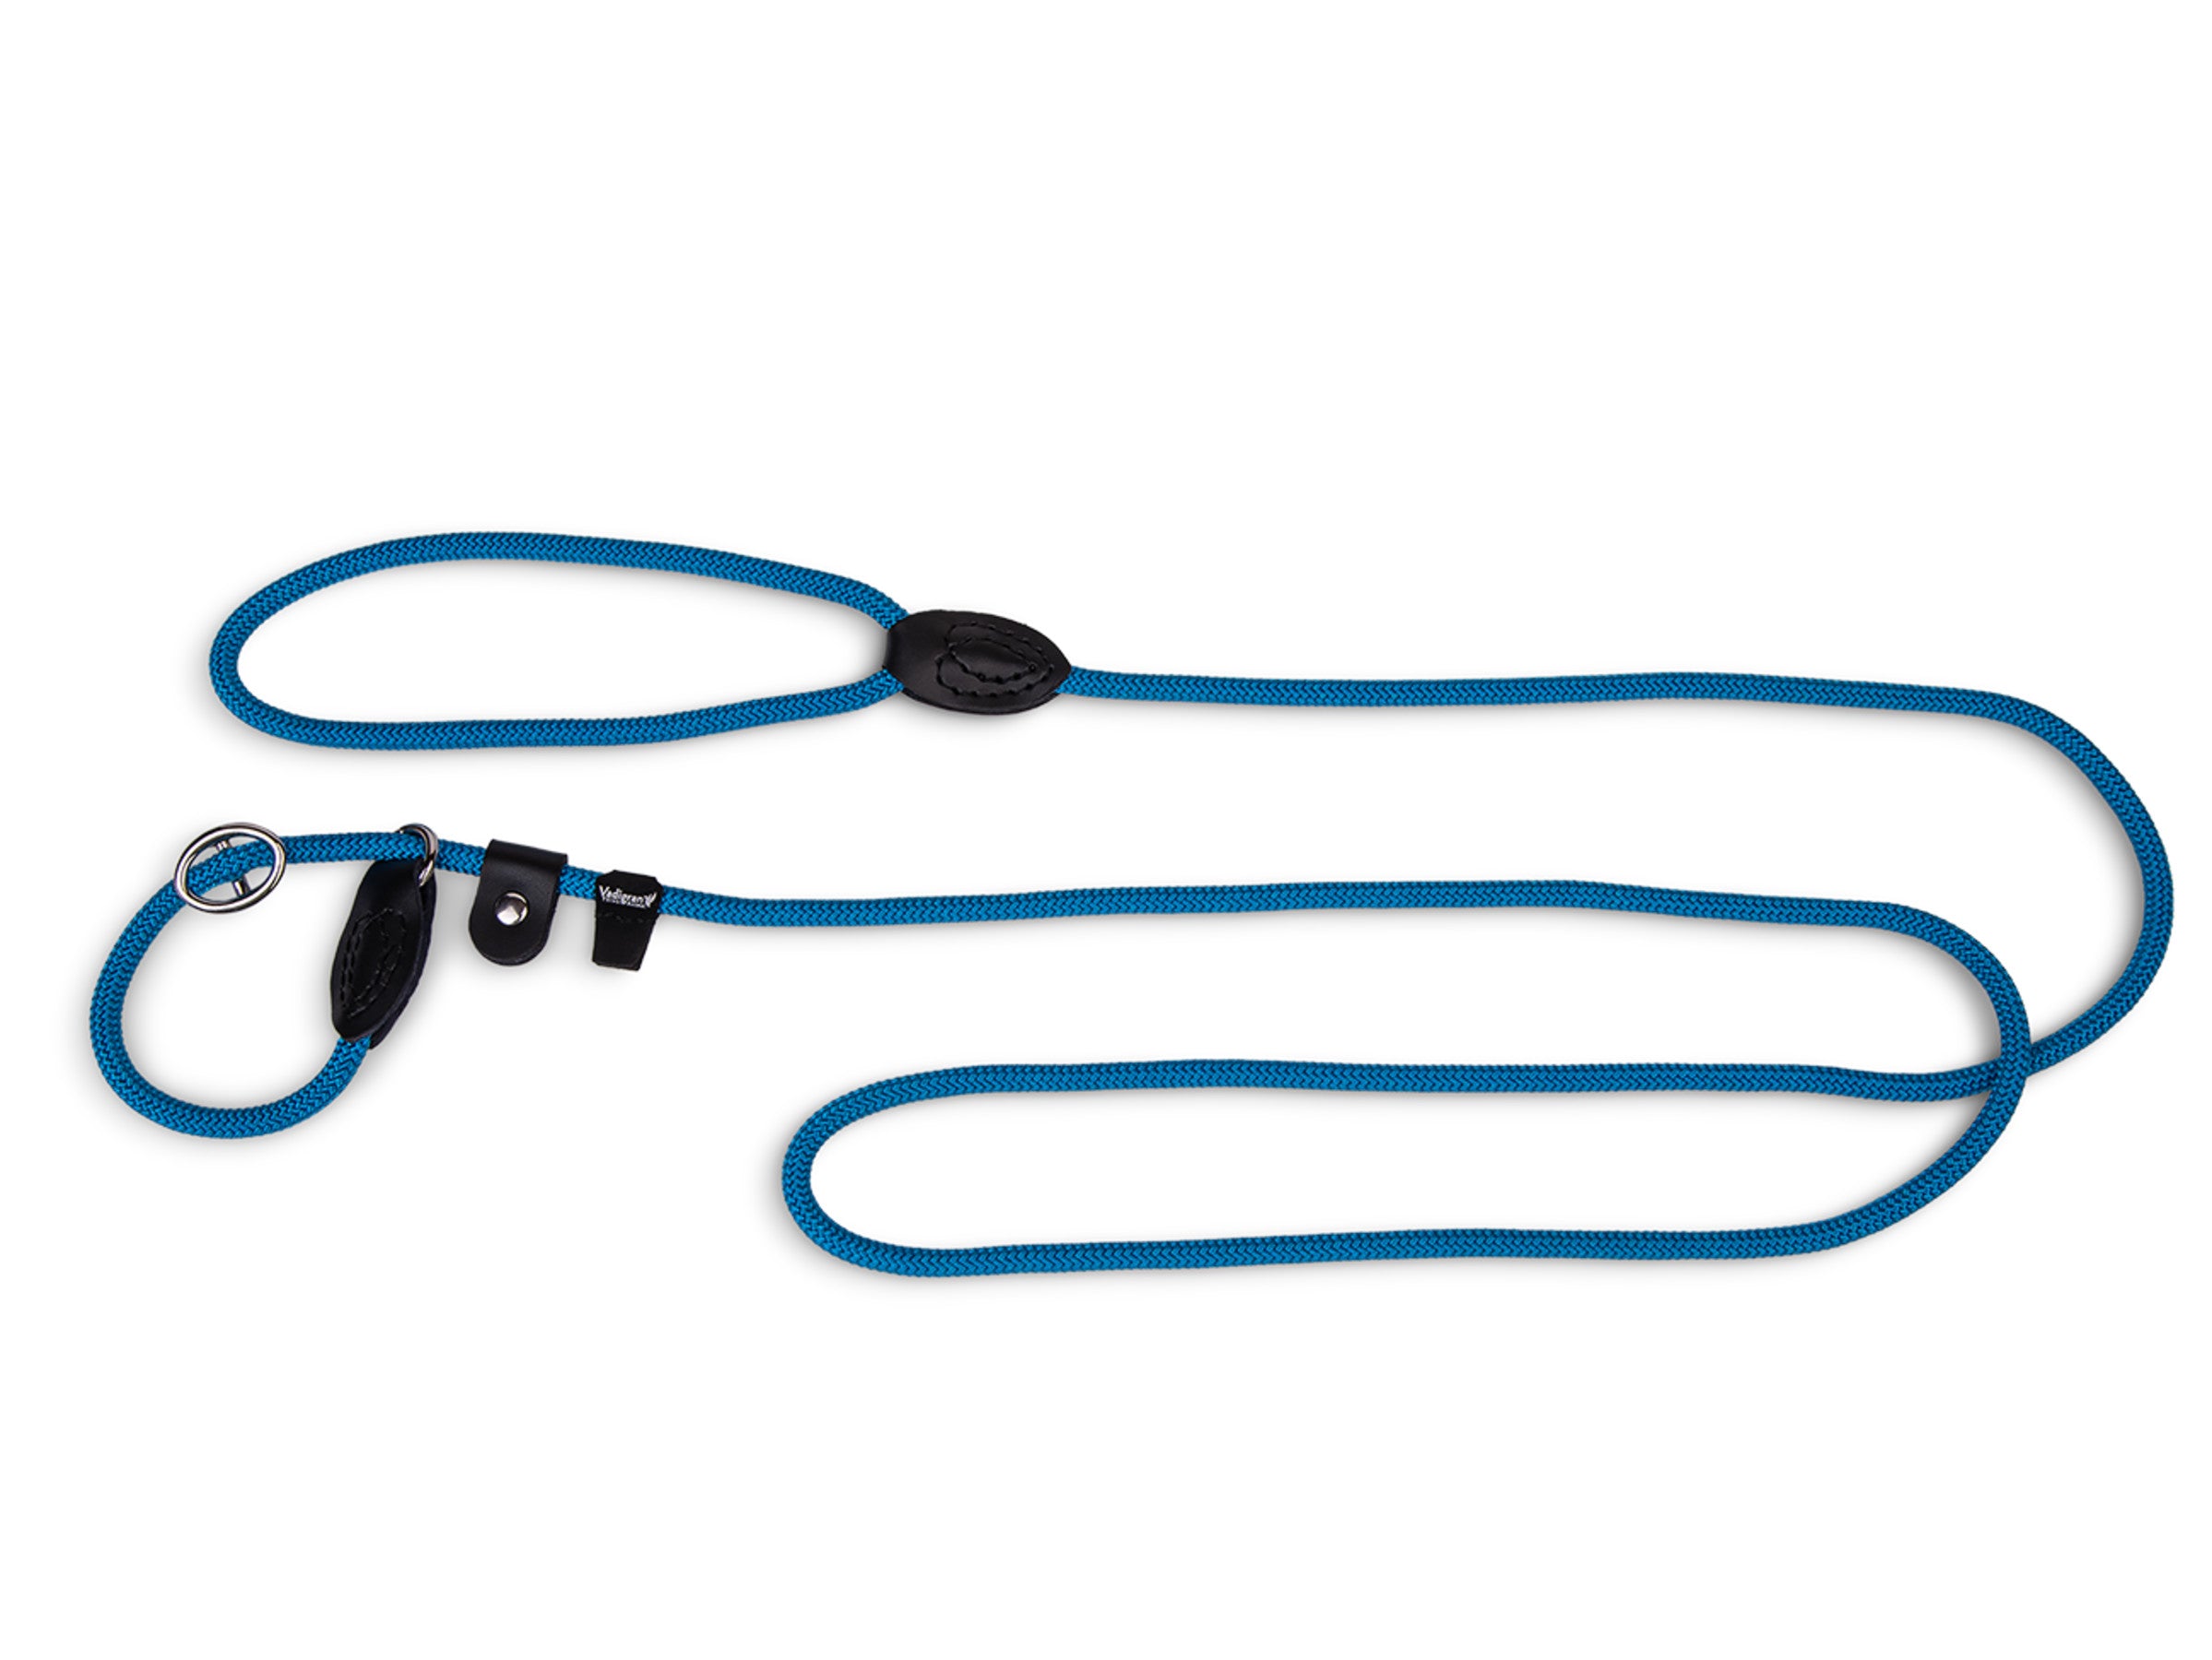 Lasso classic nylon turquoise S 170 cm x 6mm - Pip & Pepper by Dierenspeciaalzaak Huysmans